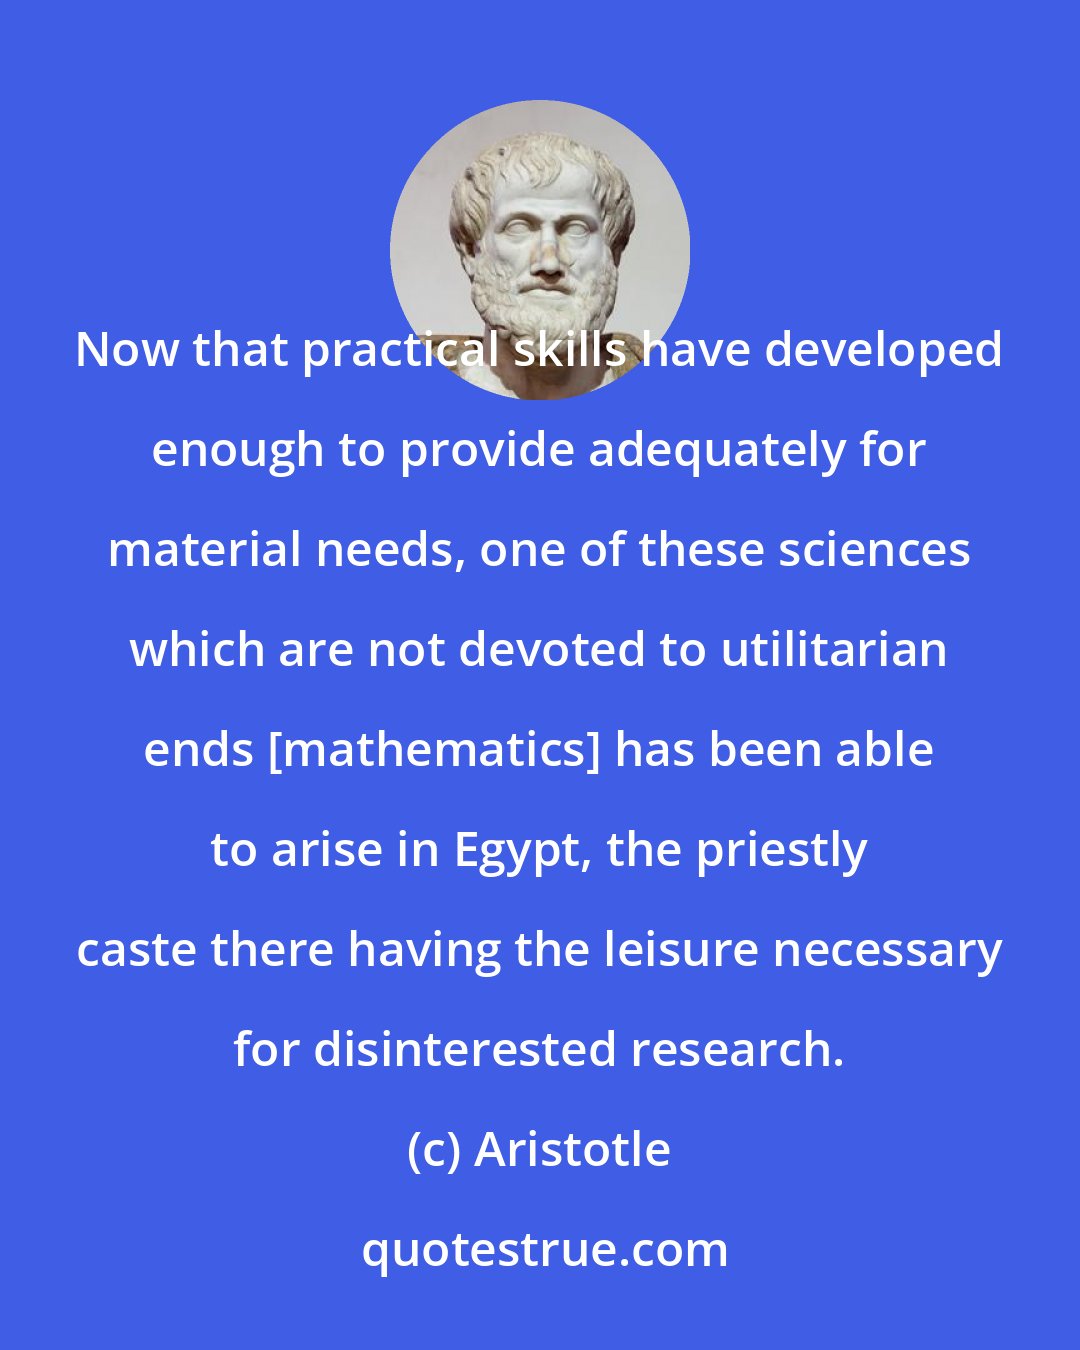 Aristotle: Now that practical skills have developed enough to provide adequately for material needs, one of these sciences which are not devoted to utilitarian ends [mathematics] has been able to arise in Egypt, the priestly caste there having the leisure necessary for disinterested research.